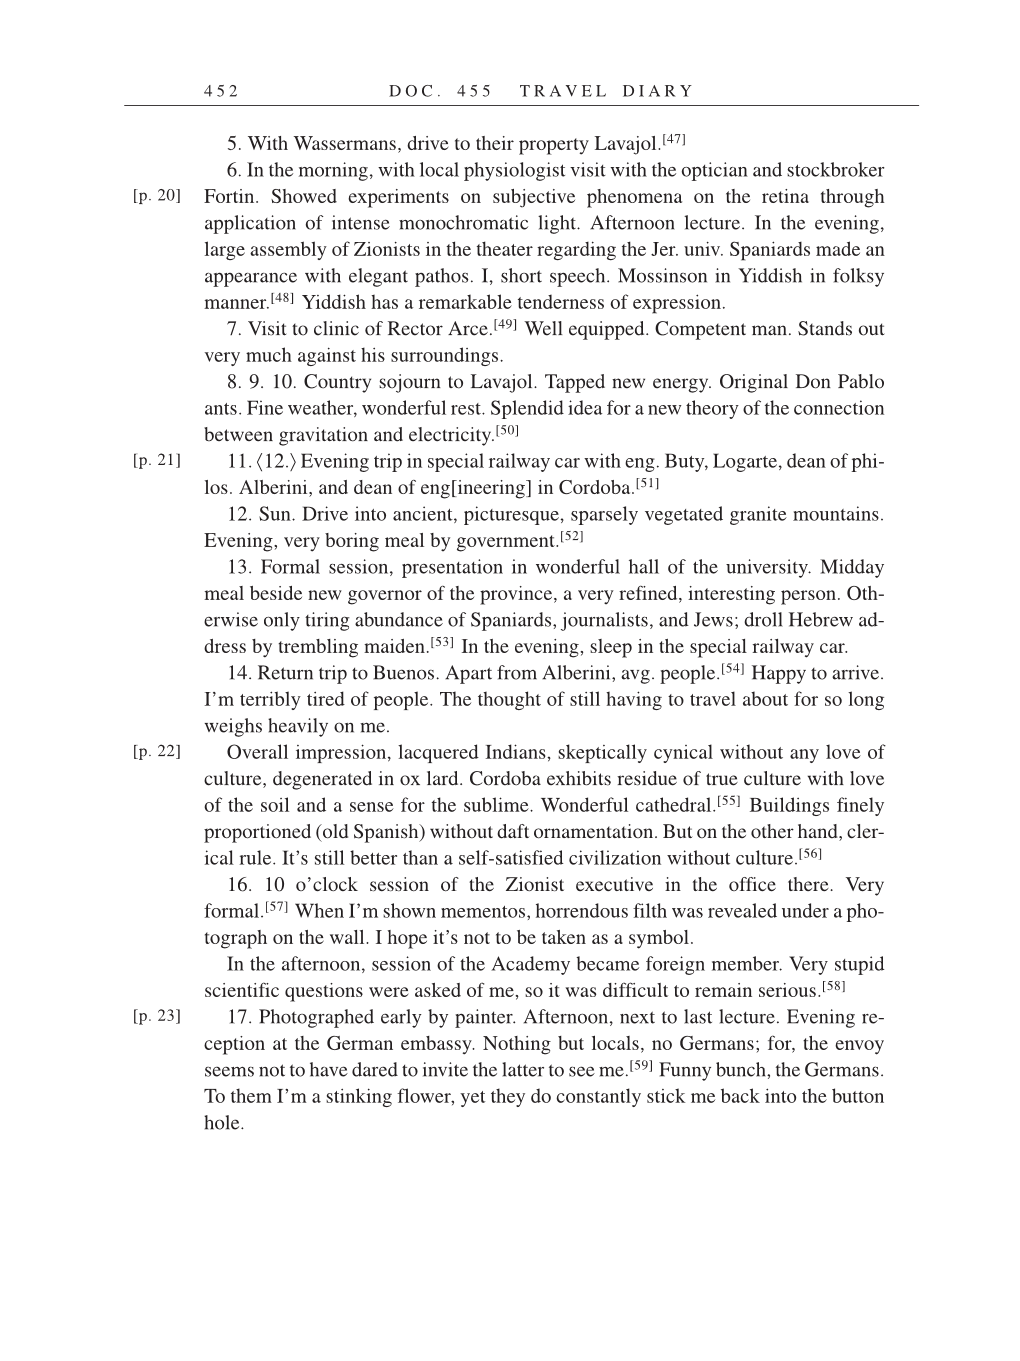 Volume 14: The Berlin Years: Writings & Correspondence, April 1923-May 1925 (English Translation Supplement) page 452